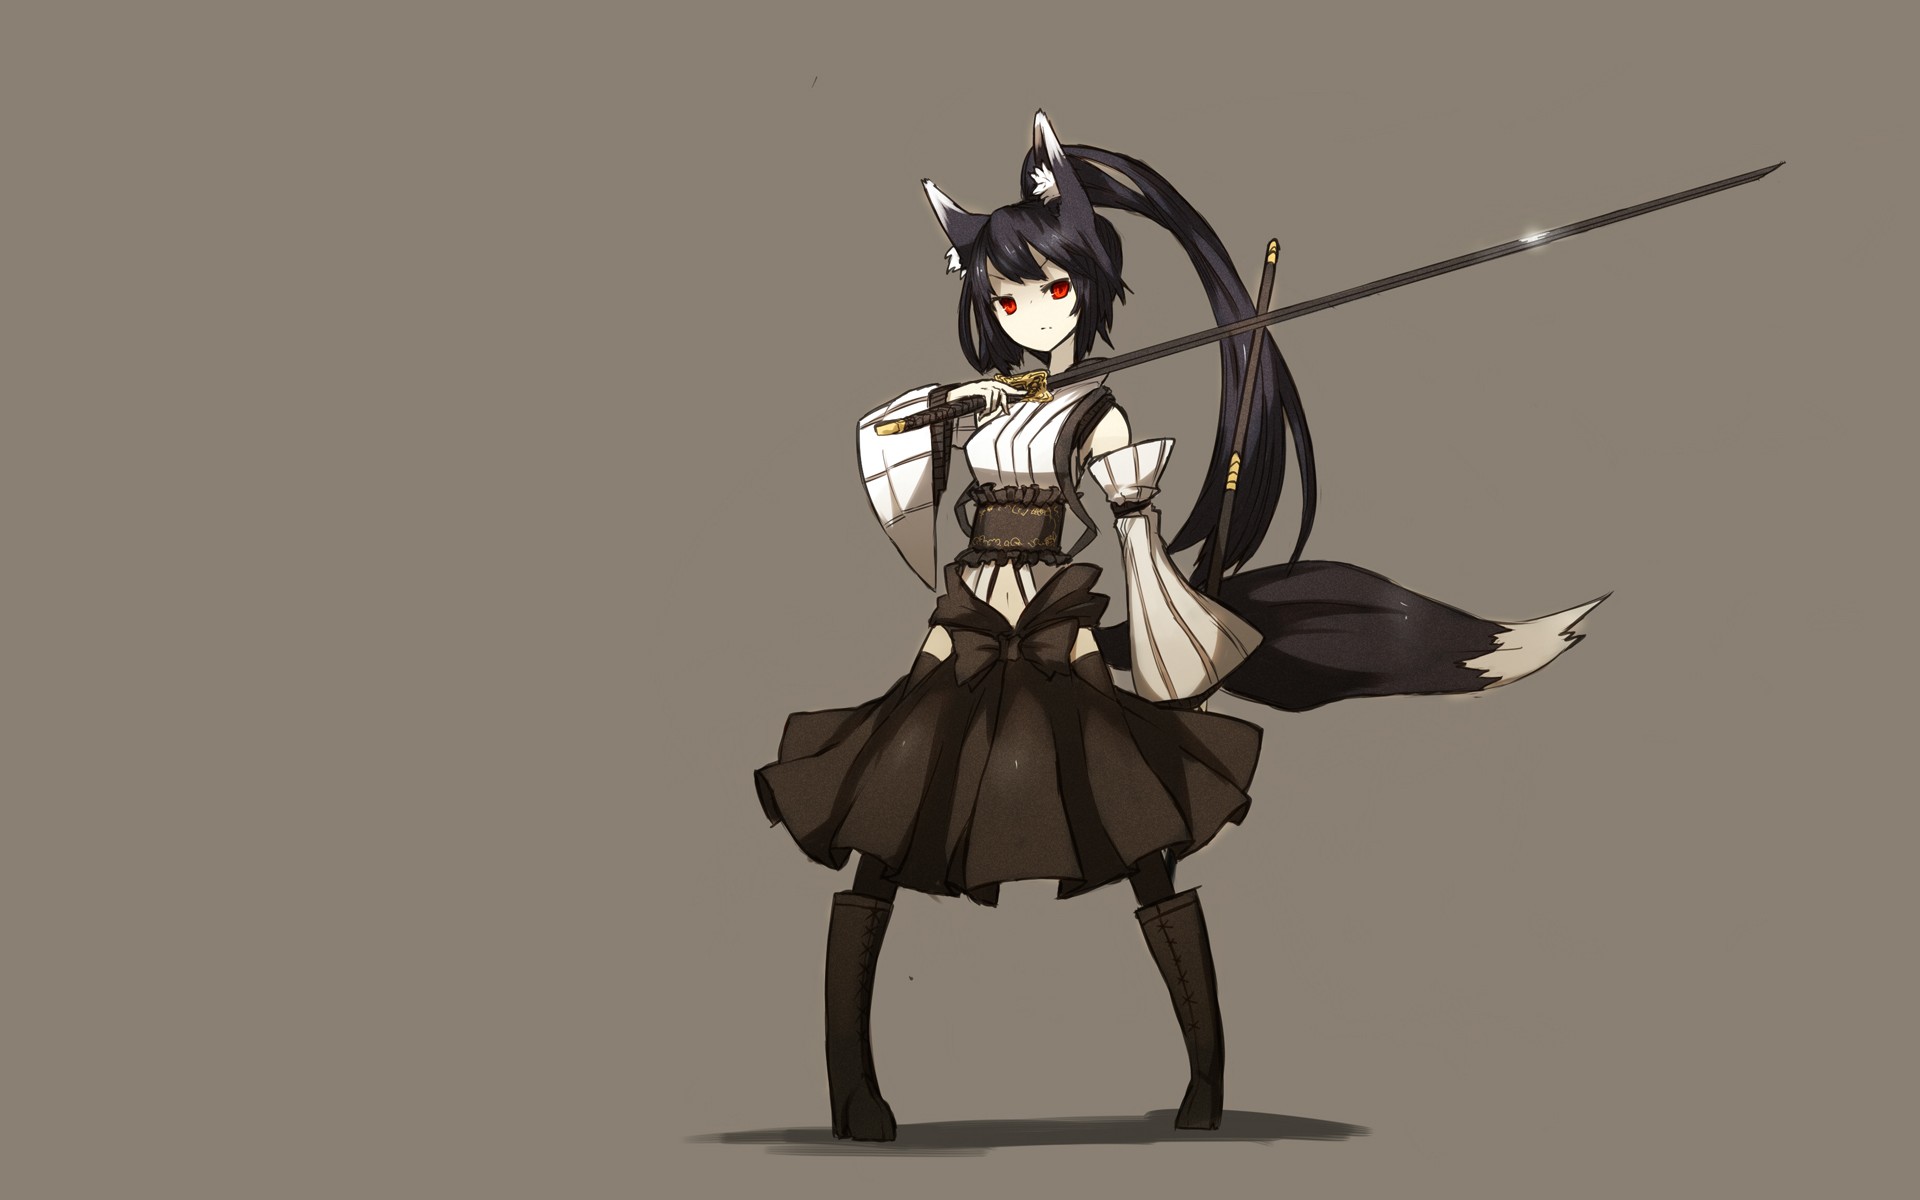 boots, Tails, Skirts, Long, Hair, Weapons, Animal, Ears, Red, Eyes, Ponytails, Japanese, Clothes, Simple, Background, Anime, Girls, Swords, Brown, Background, Black, Hair Wallpaper